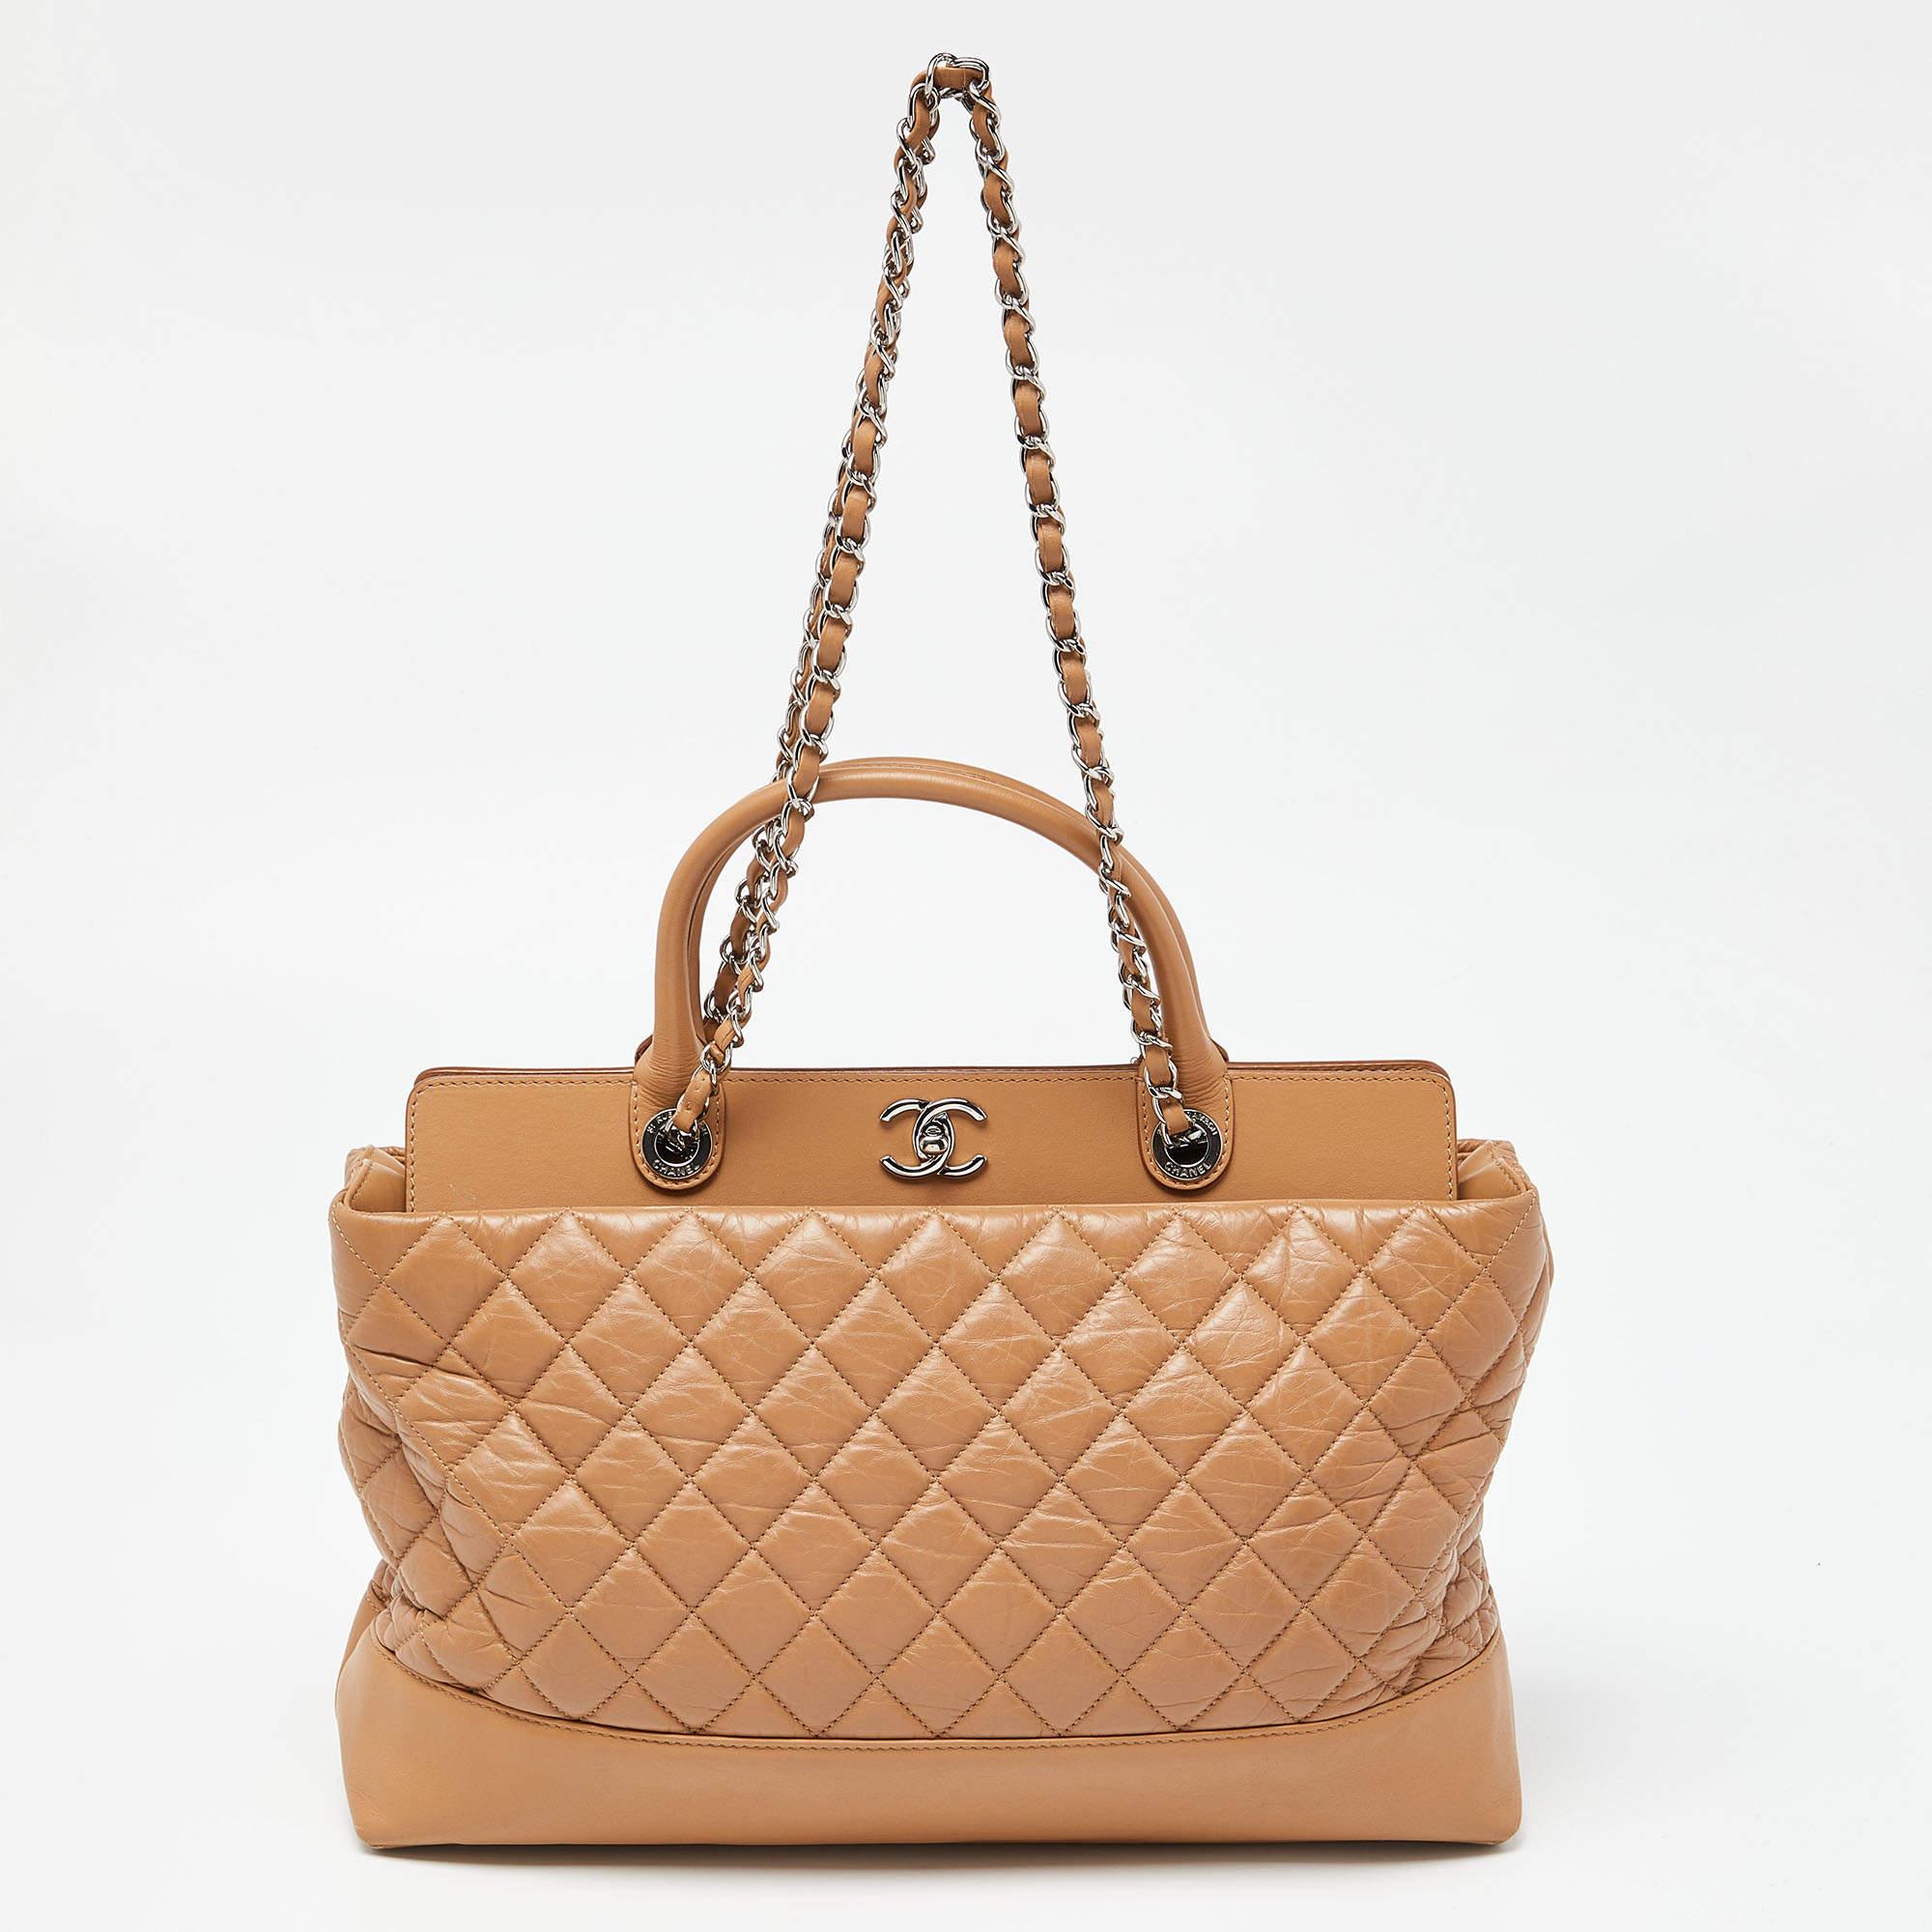 Chanel Beige Quilted Leather CC Shopper Tote For Sale 8